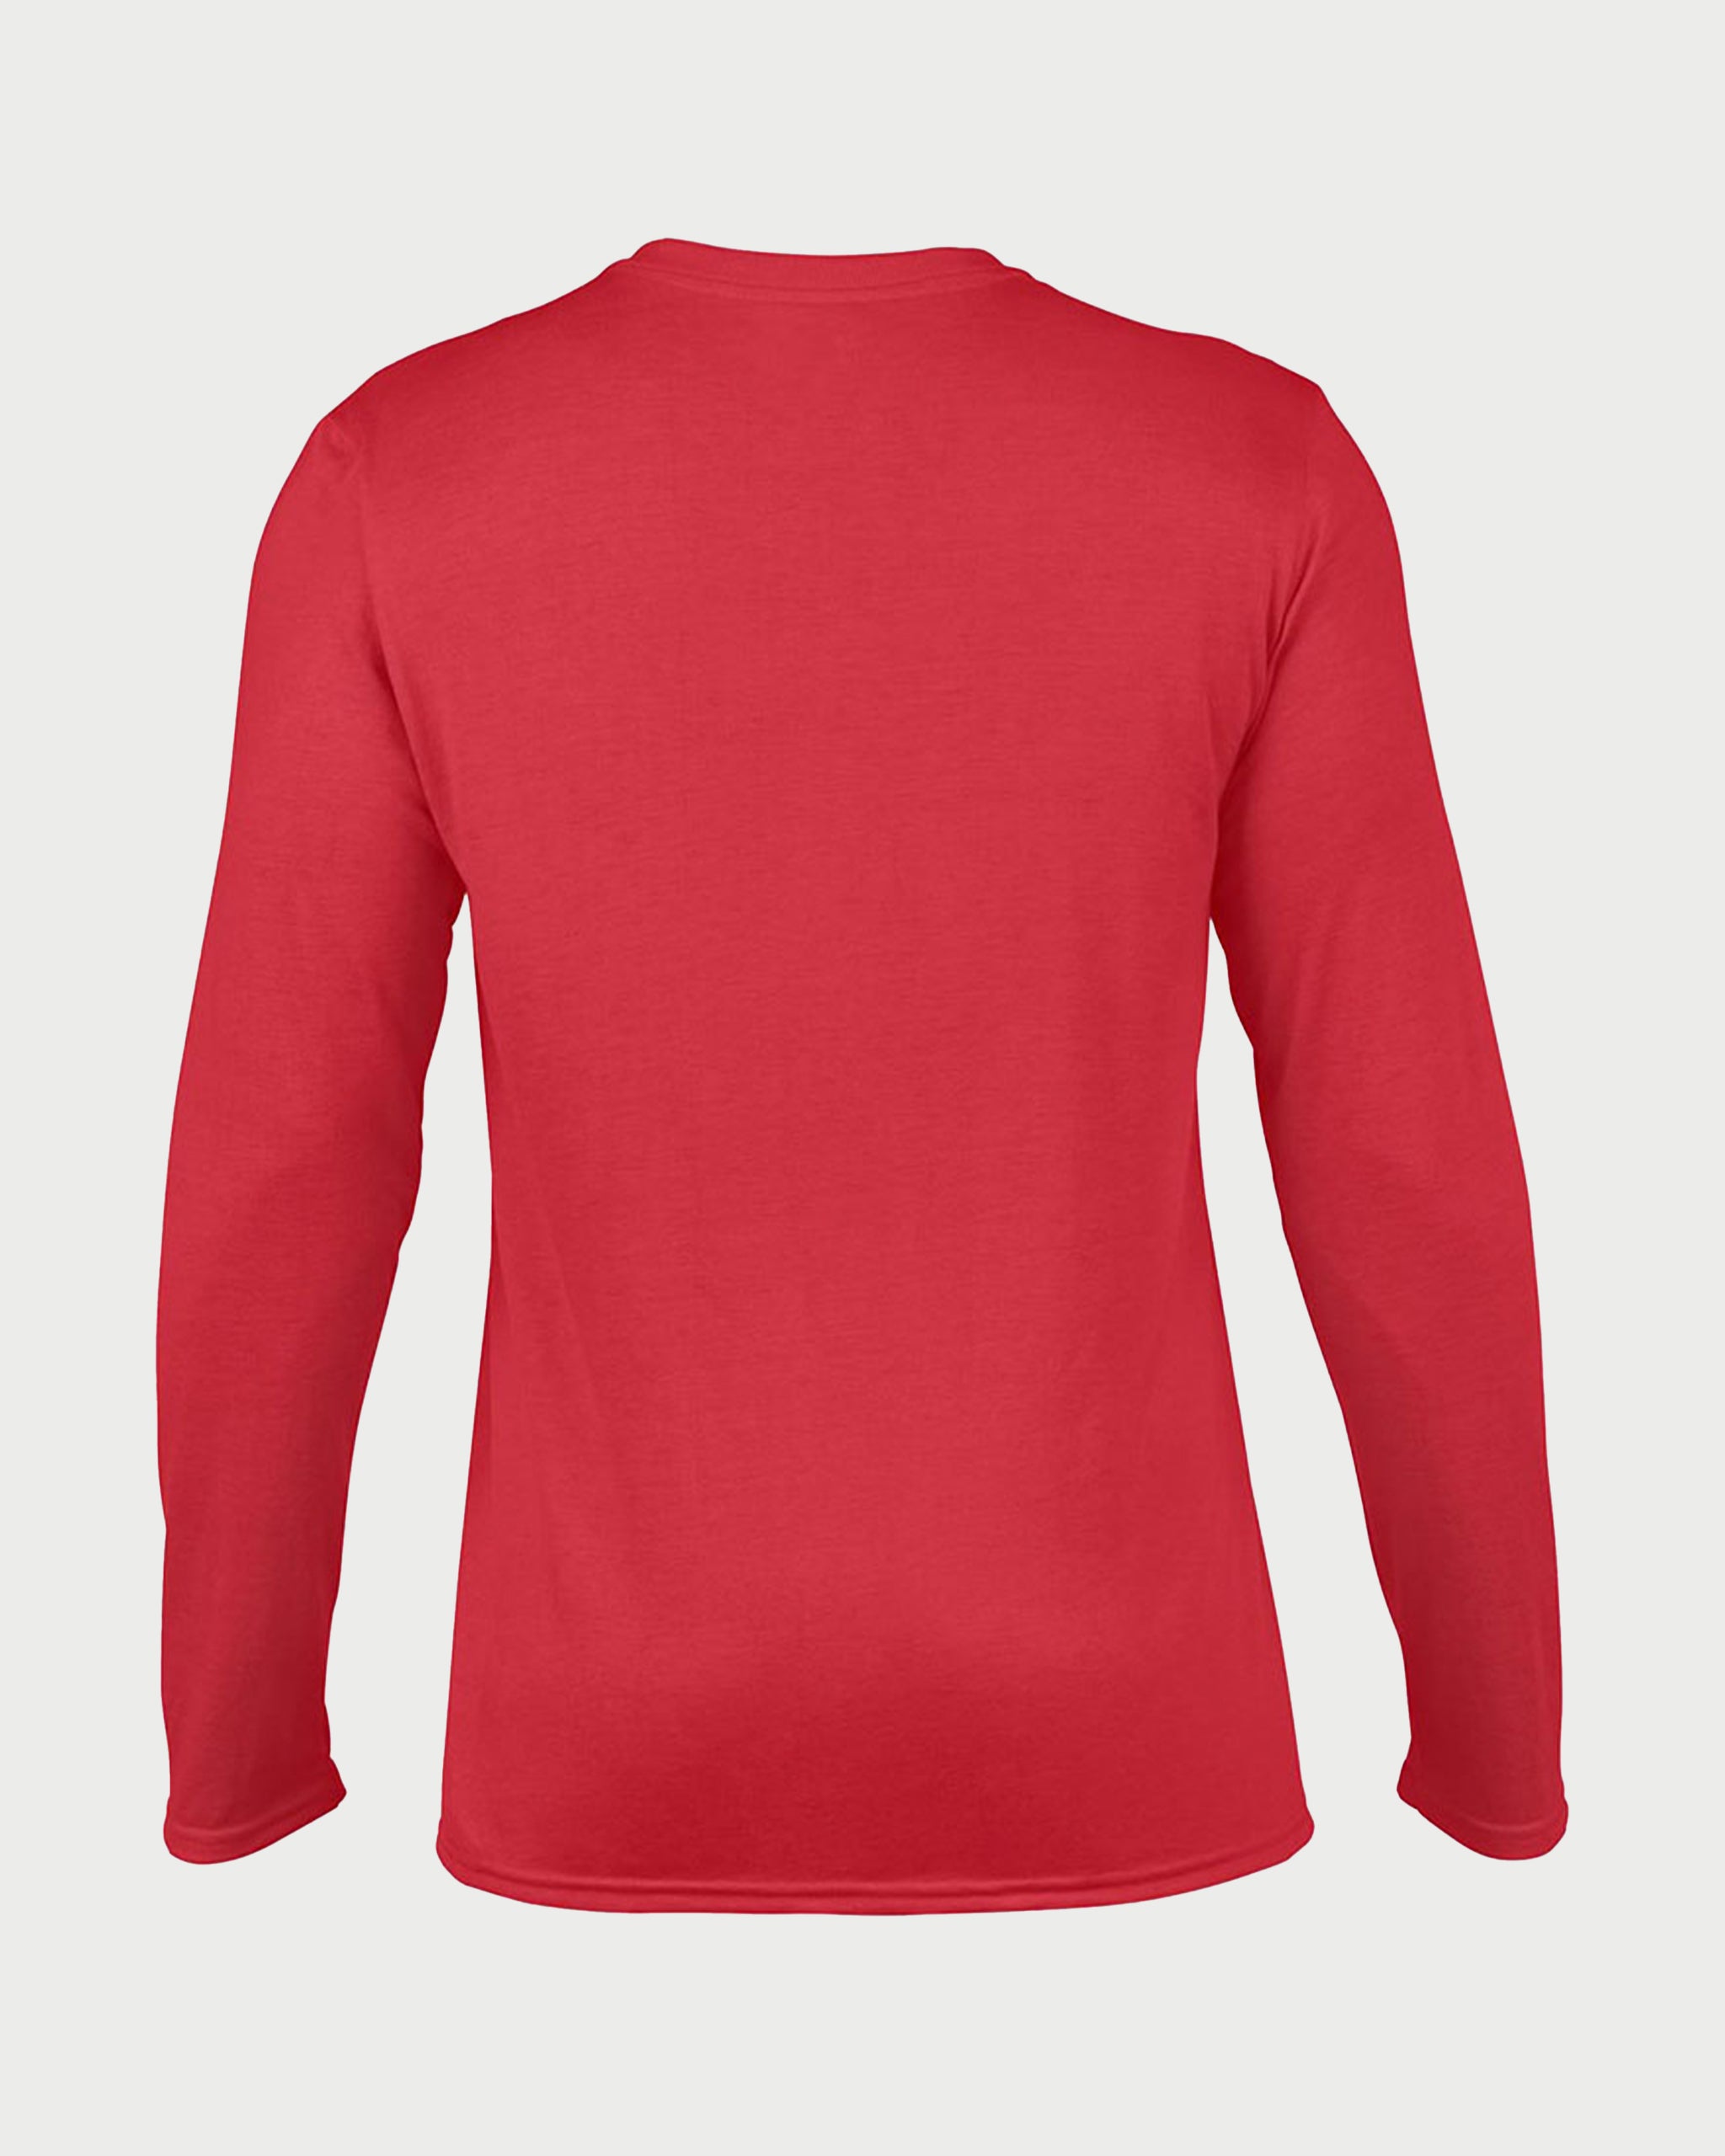 RED ICONIC-bluza barbateasca din material special